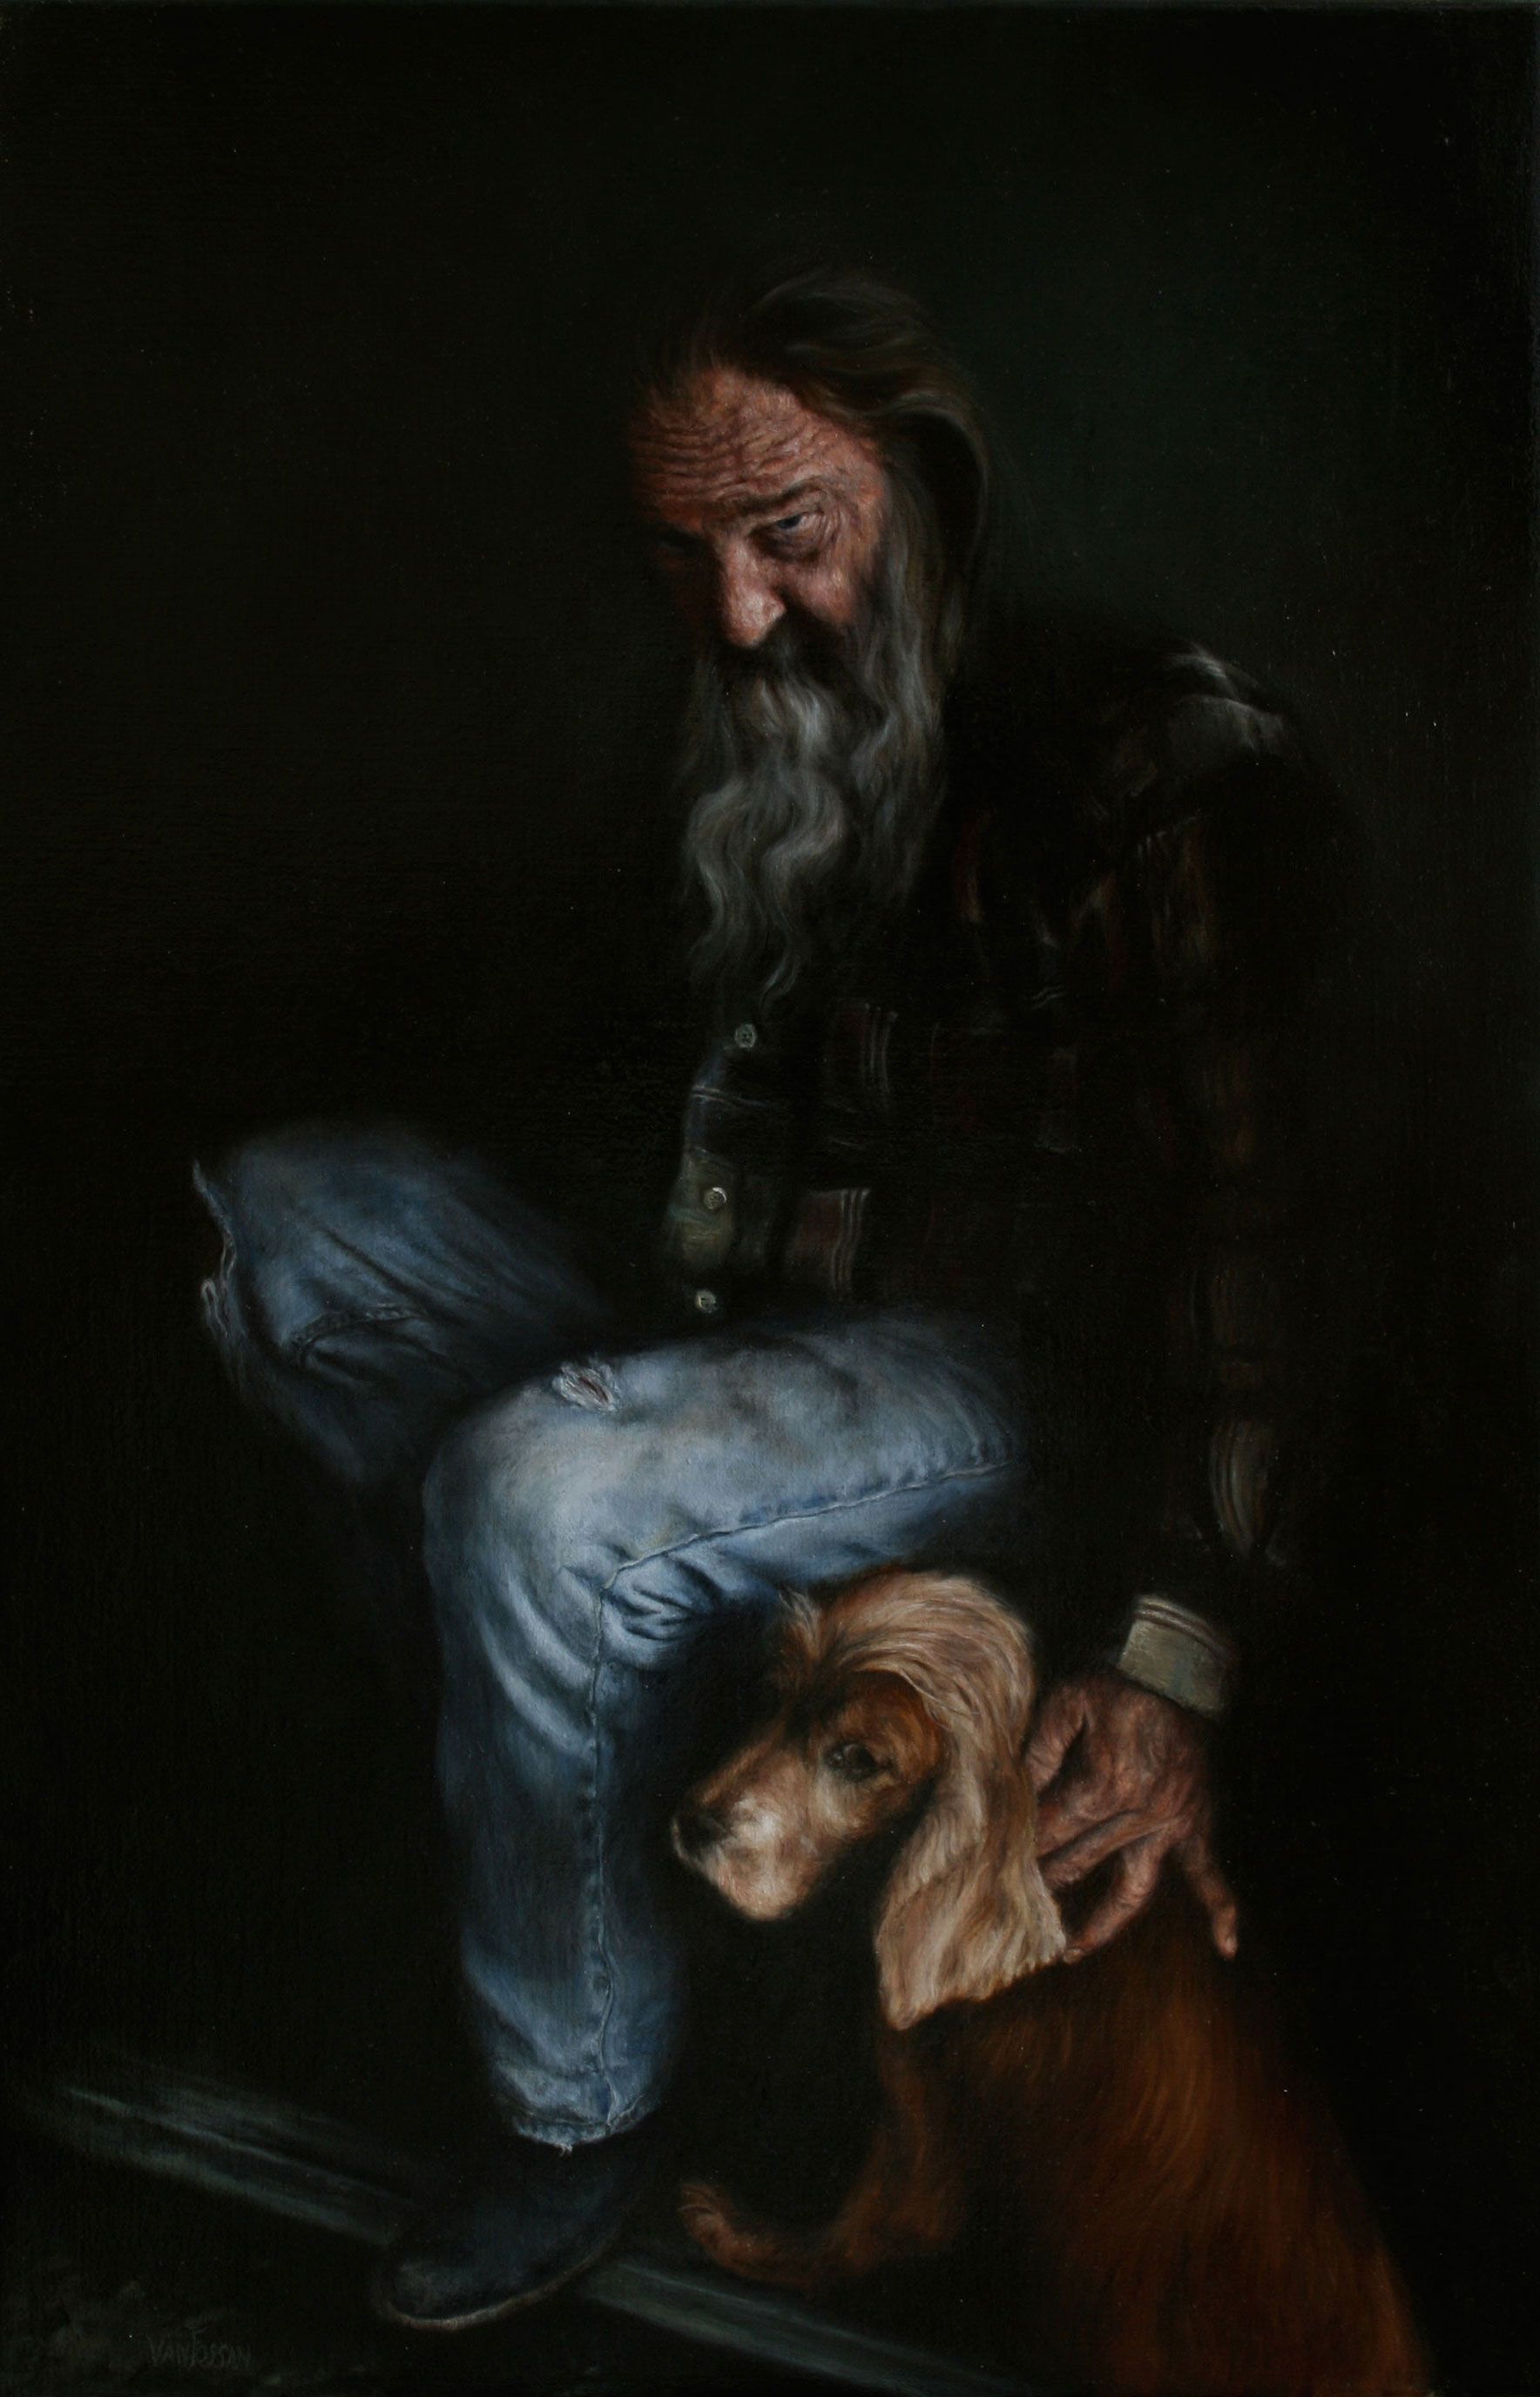 Old Man and His Dog by James Van Fossan